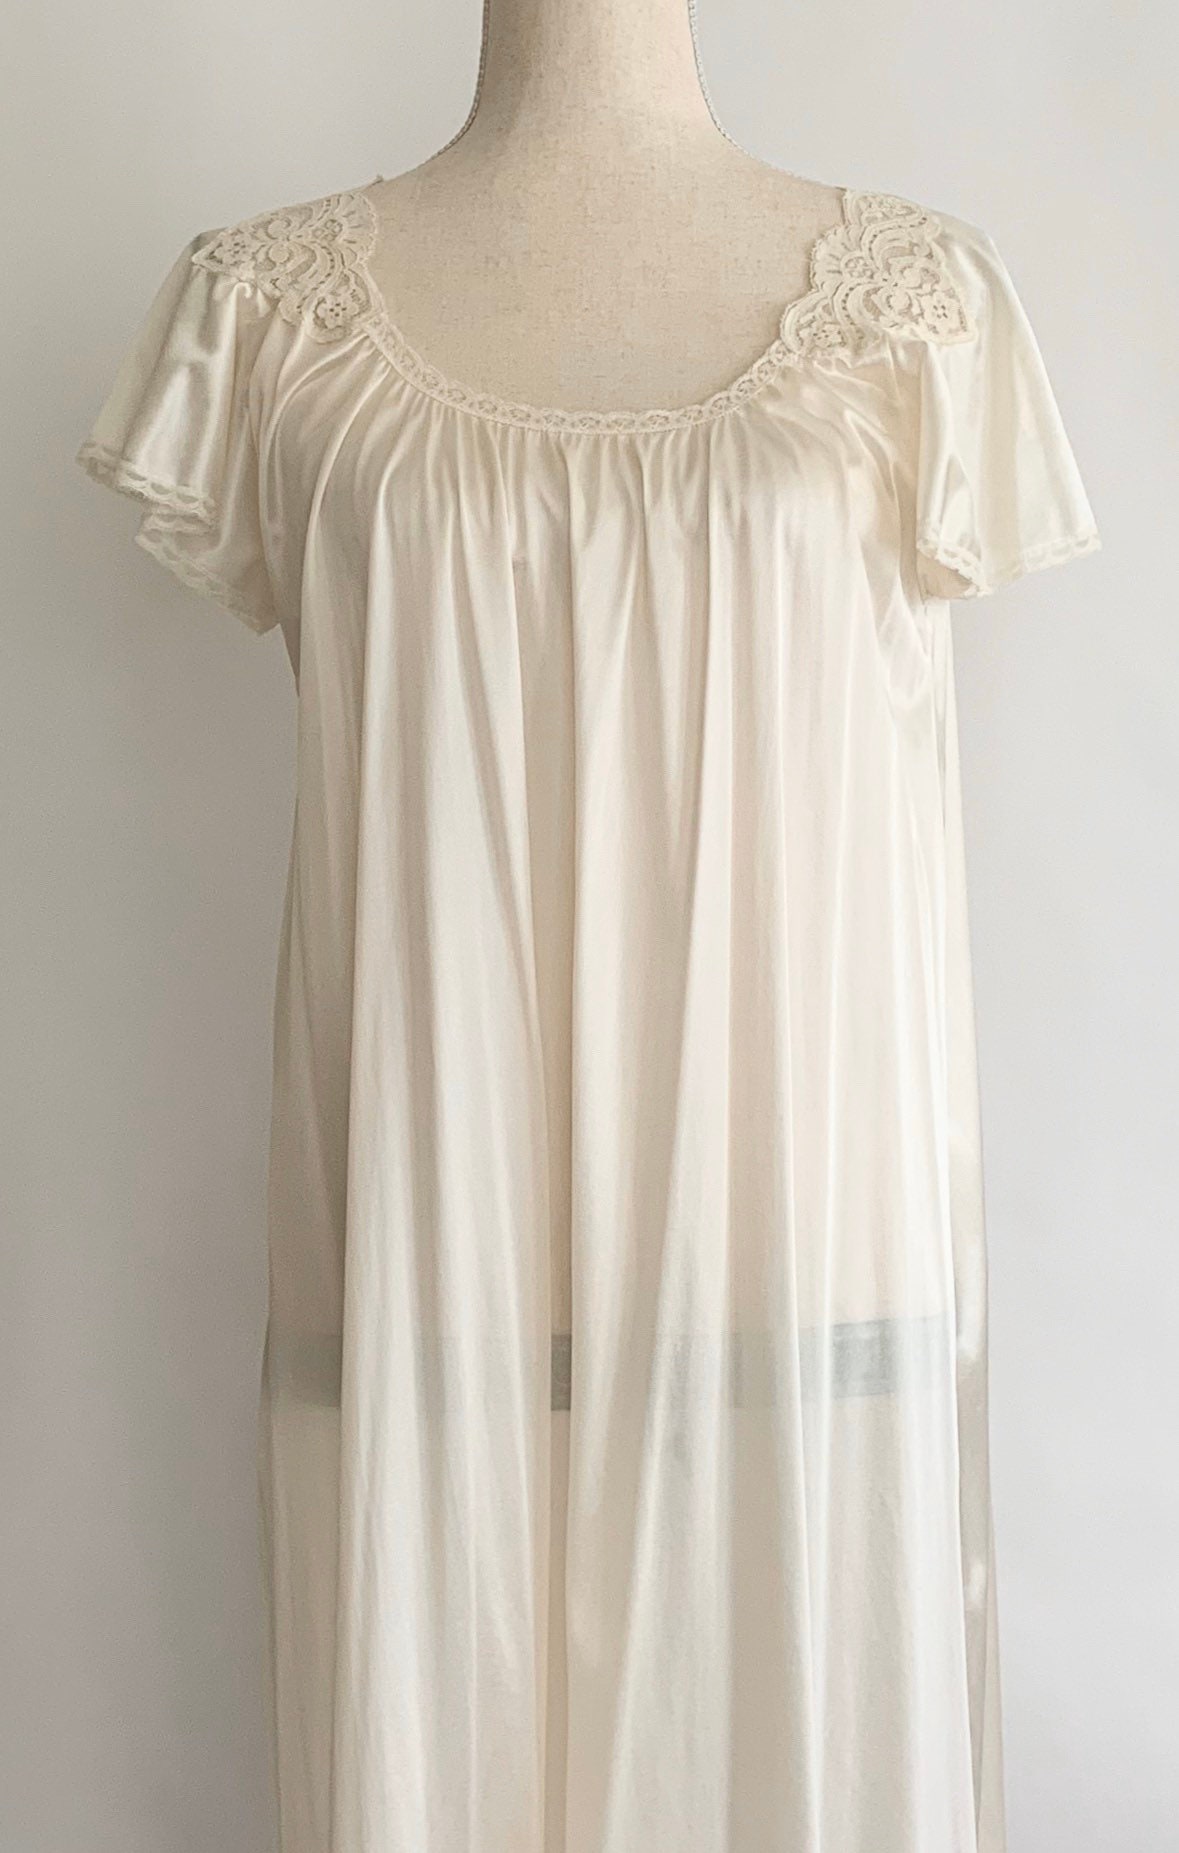 Ivory White Lace Nightgown Nightie Romantic Vintage 50s Miss Elaine ...